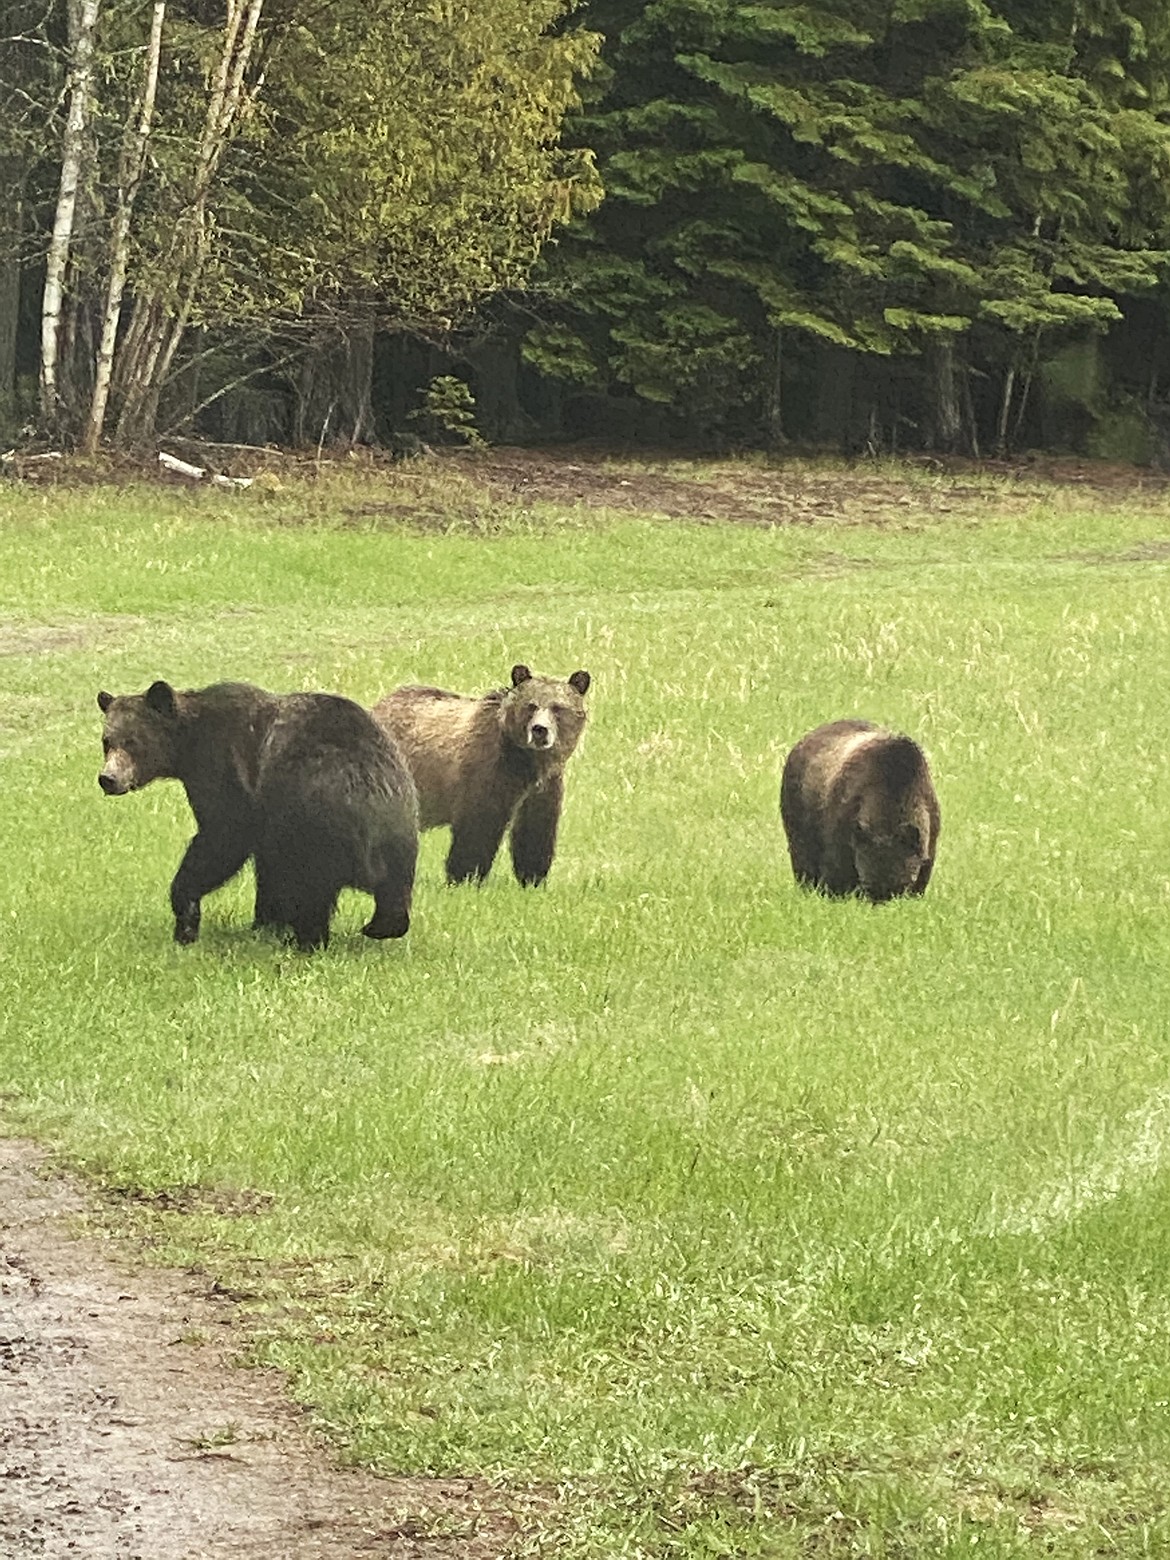 Three subadult grizzly bears feed on grass in the Swan Lake area. (Photo courtesy of Cliff and Susan Edwards)